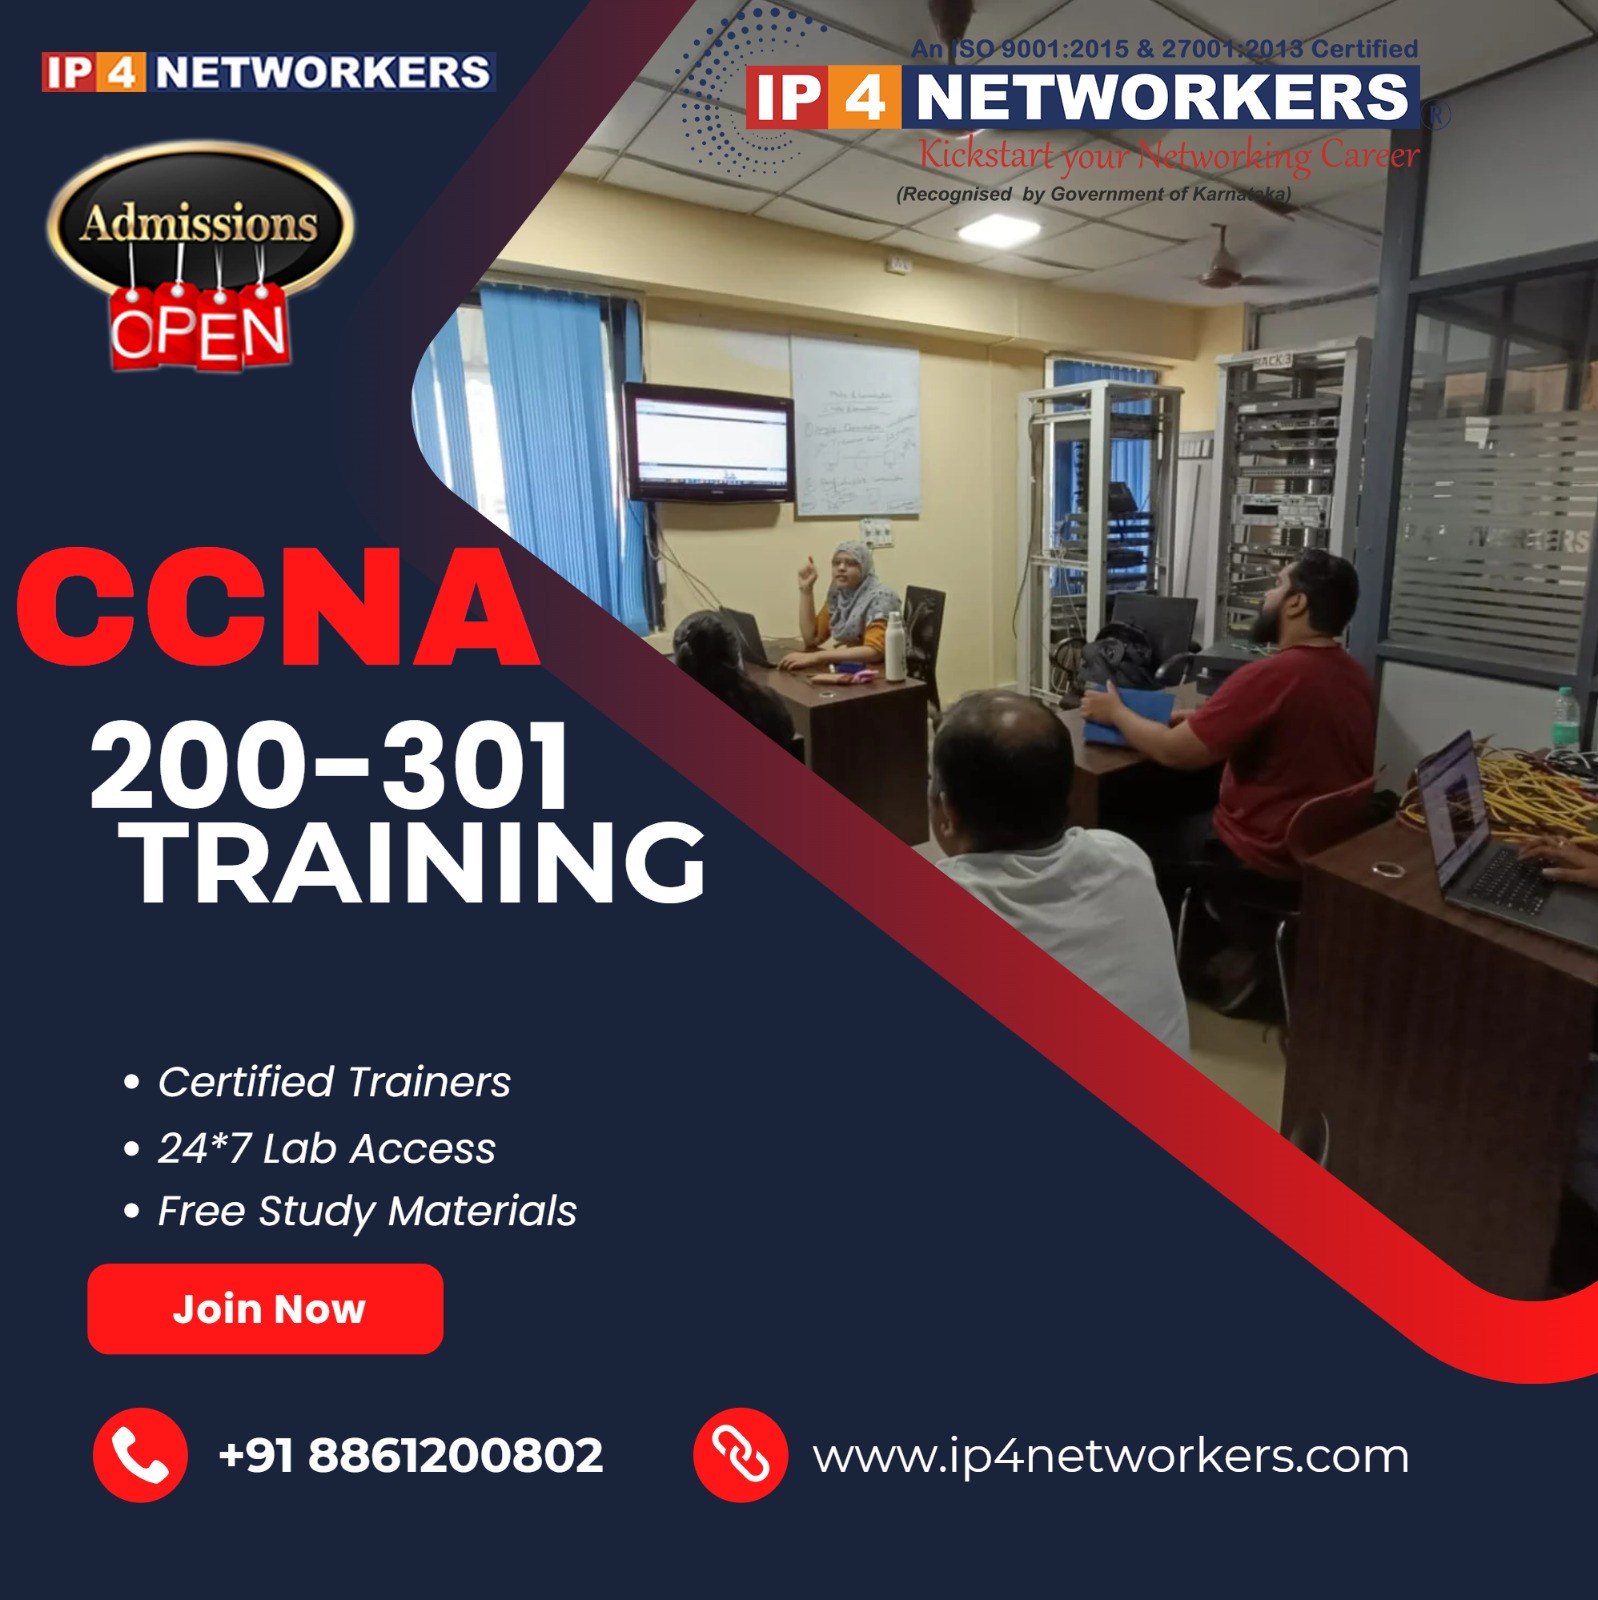 Sita NE, Ad |
IPI NETWORKERS P N Ly LUGE
» ro ) ickstar | Letyyorkints A”
Admissions Recognised by Government of Kar
wae Ea x
OPEN rr
mere |

200-301 = =

TRAINING <

e Certified Trainers
* 24*7 Lab Access
* Free Study Materials

Join Now

| 4s +91 8861200802 Q www.ip4networkers.com